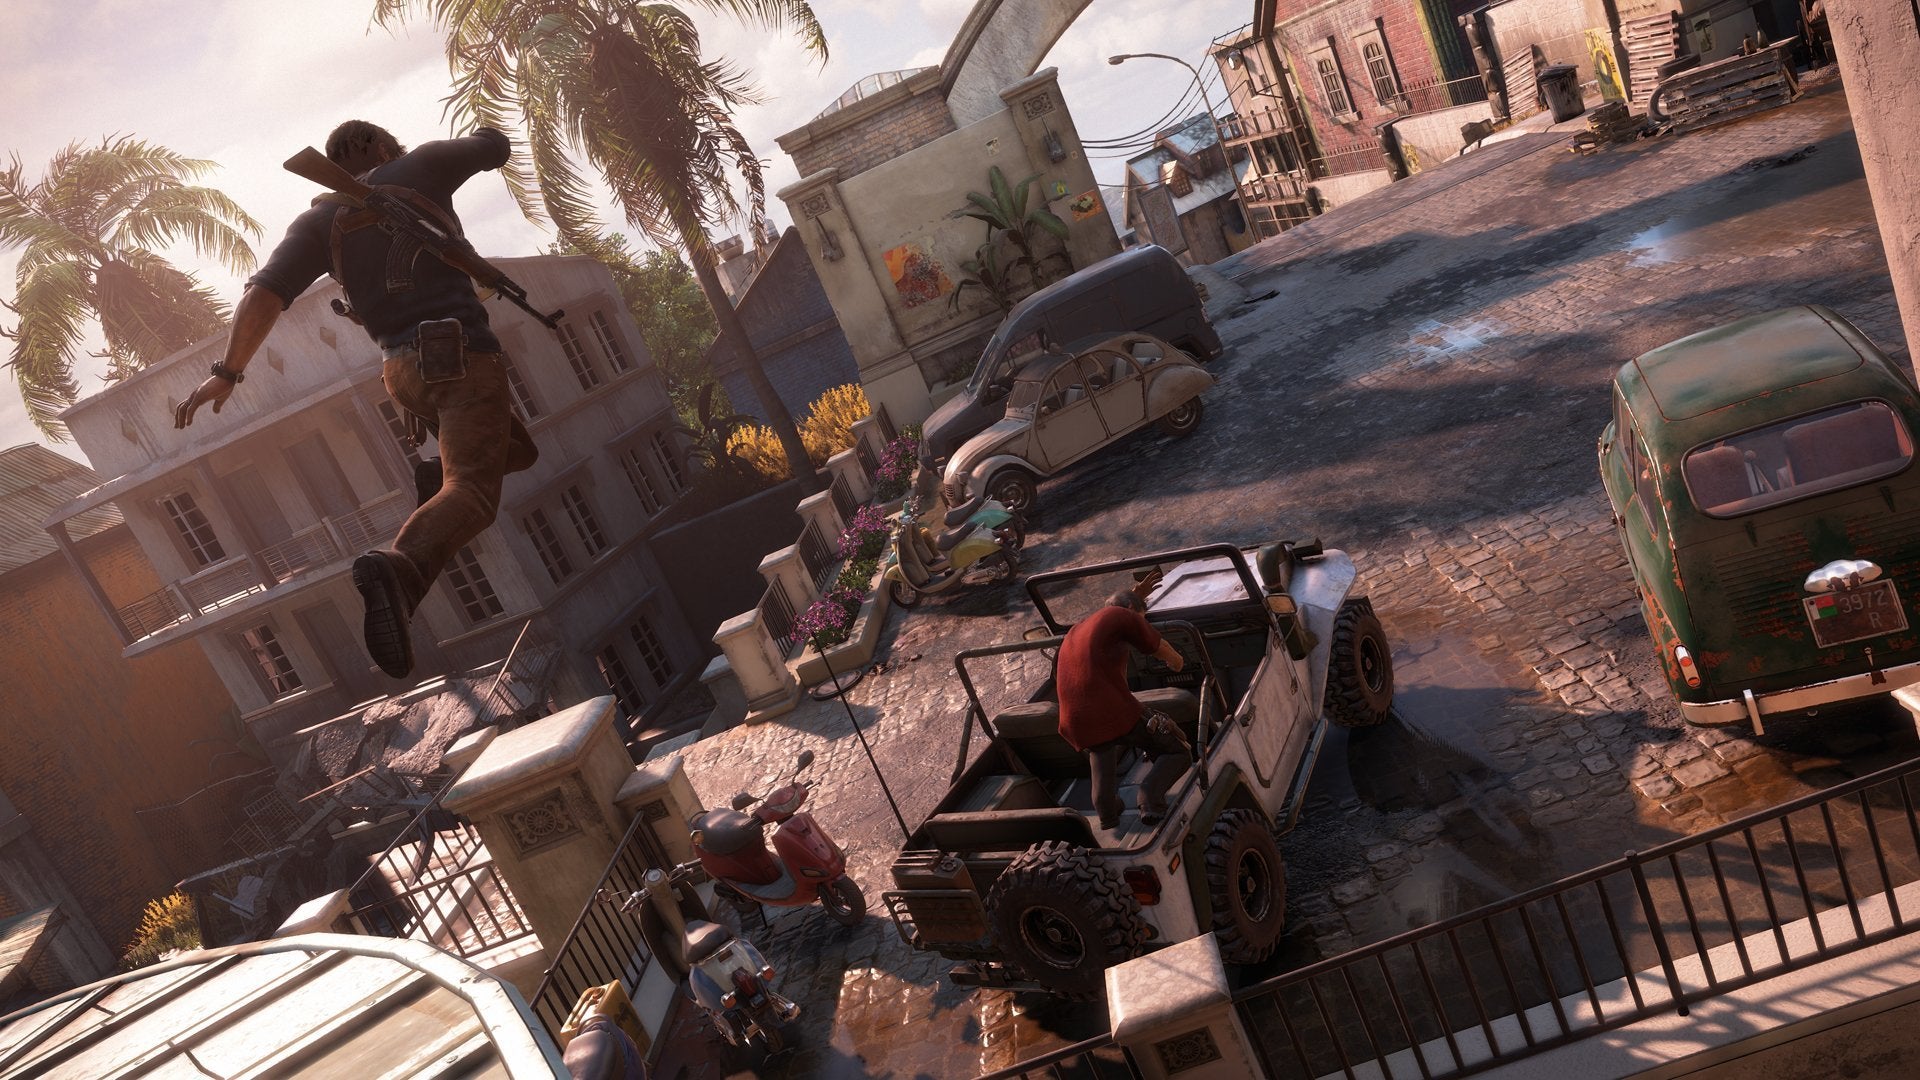 PS4 UNCHARTED 4